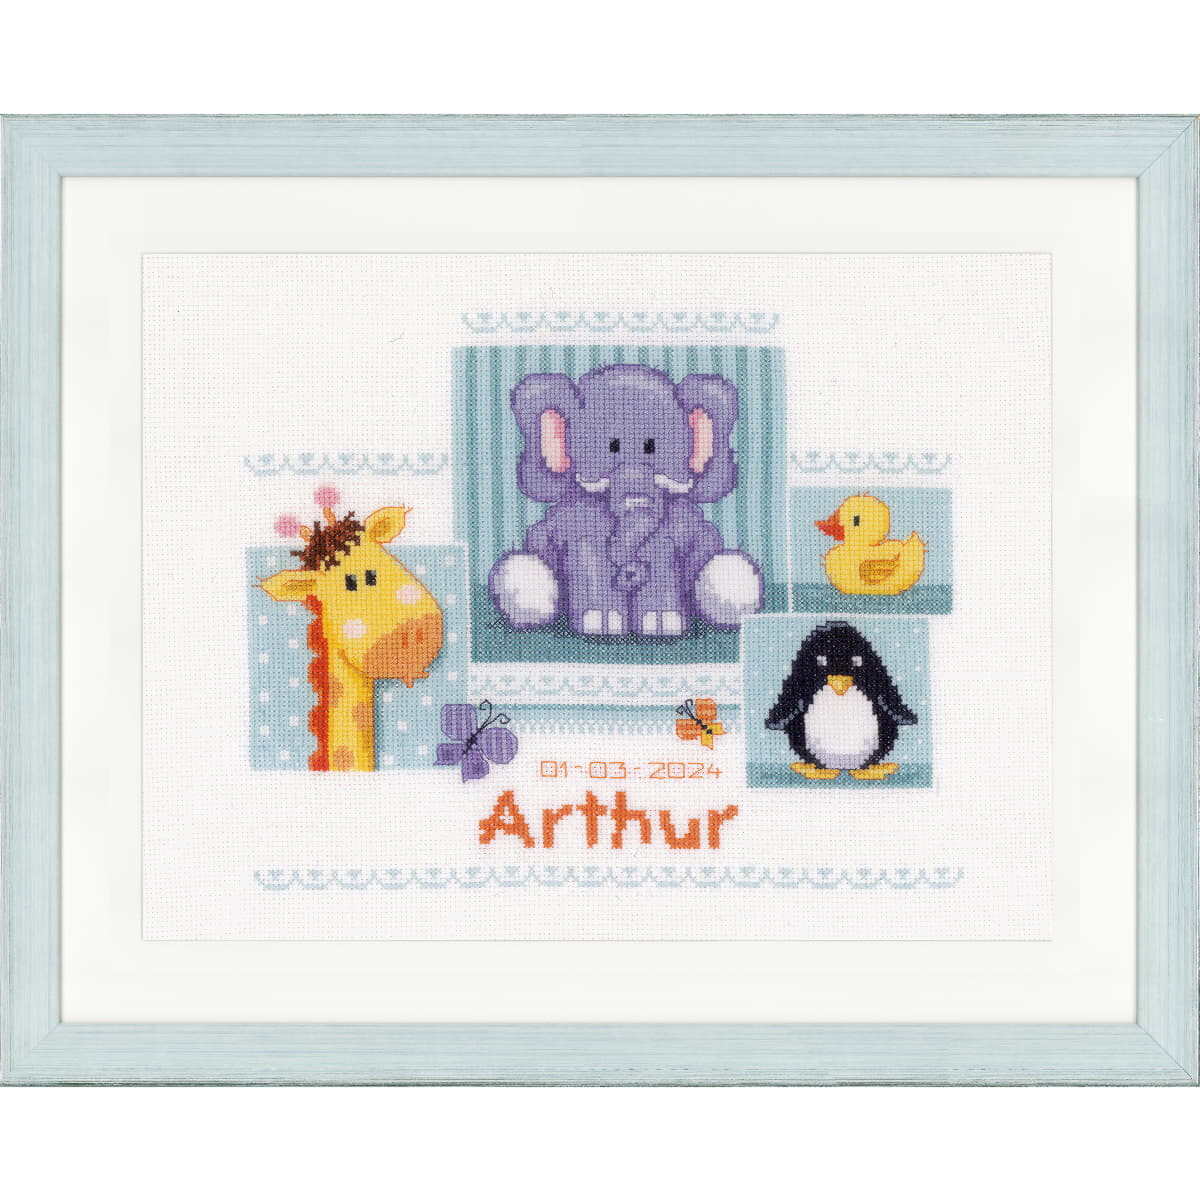 Vervaco counted cross stitch kit "Baby...